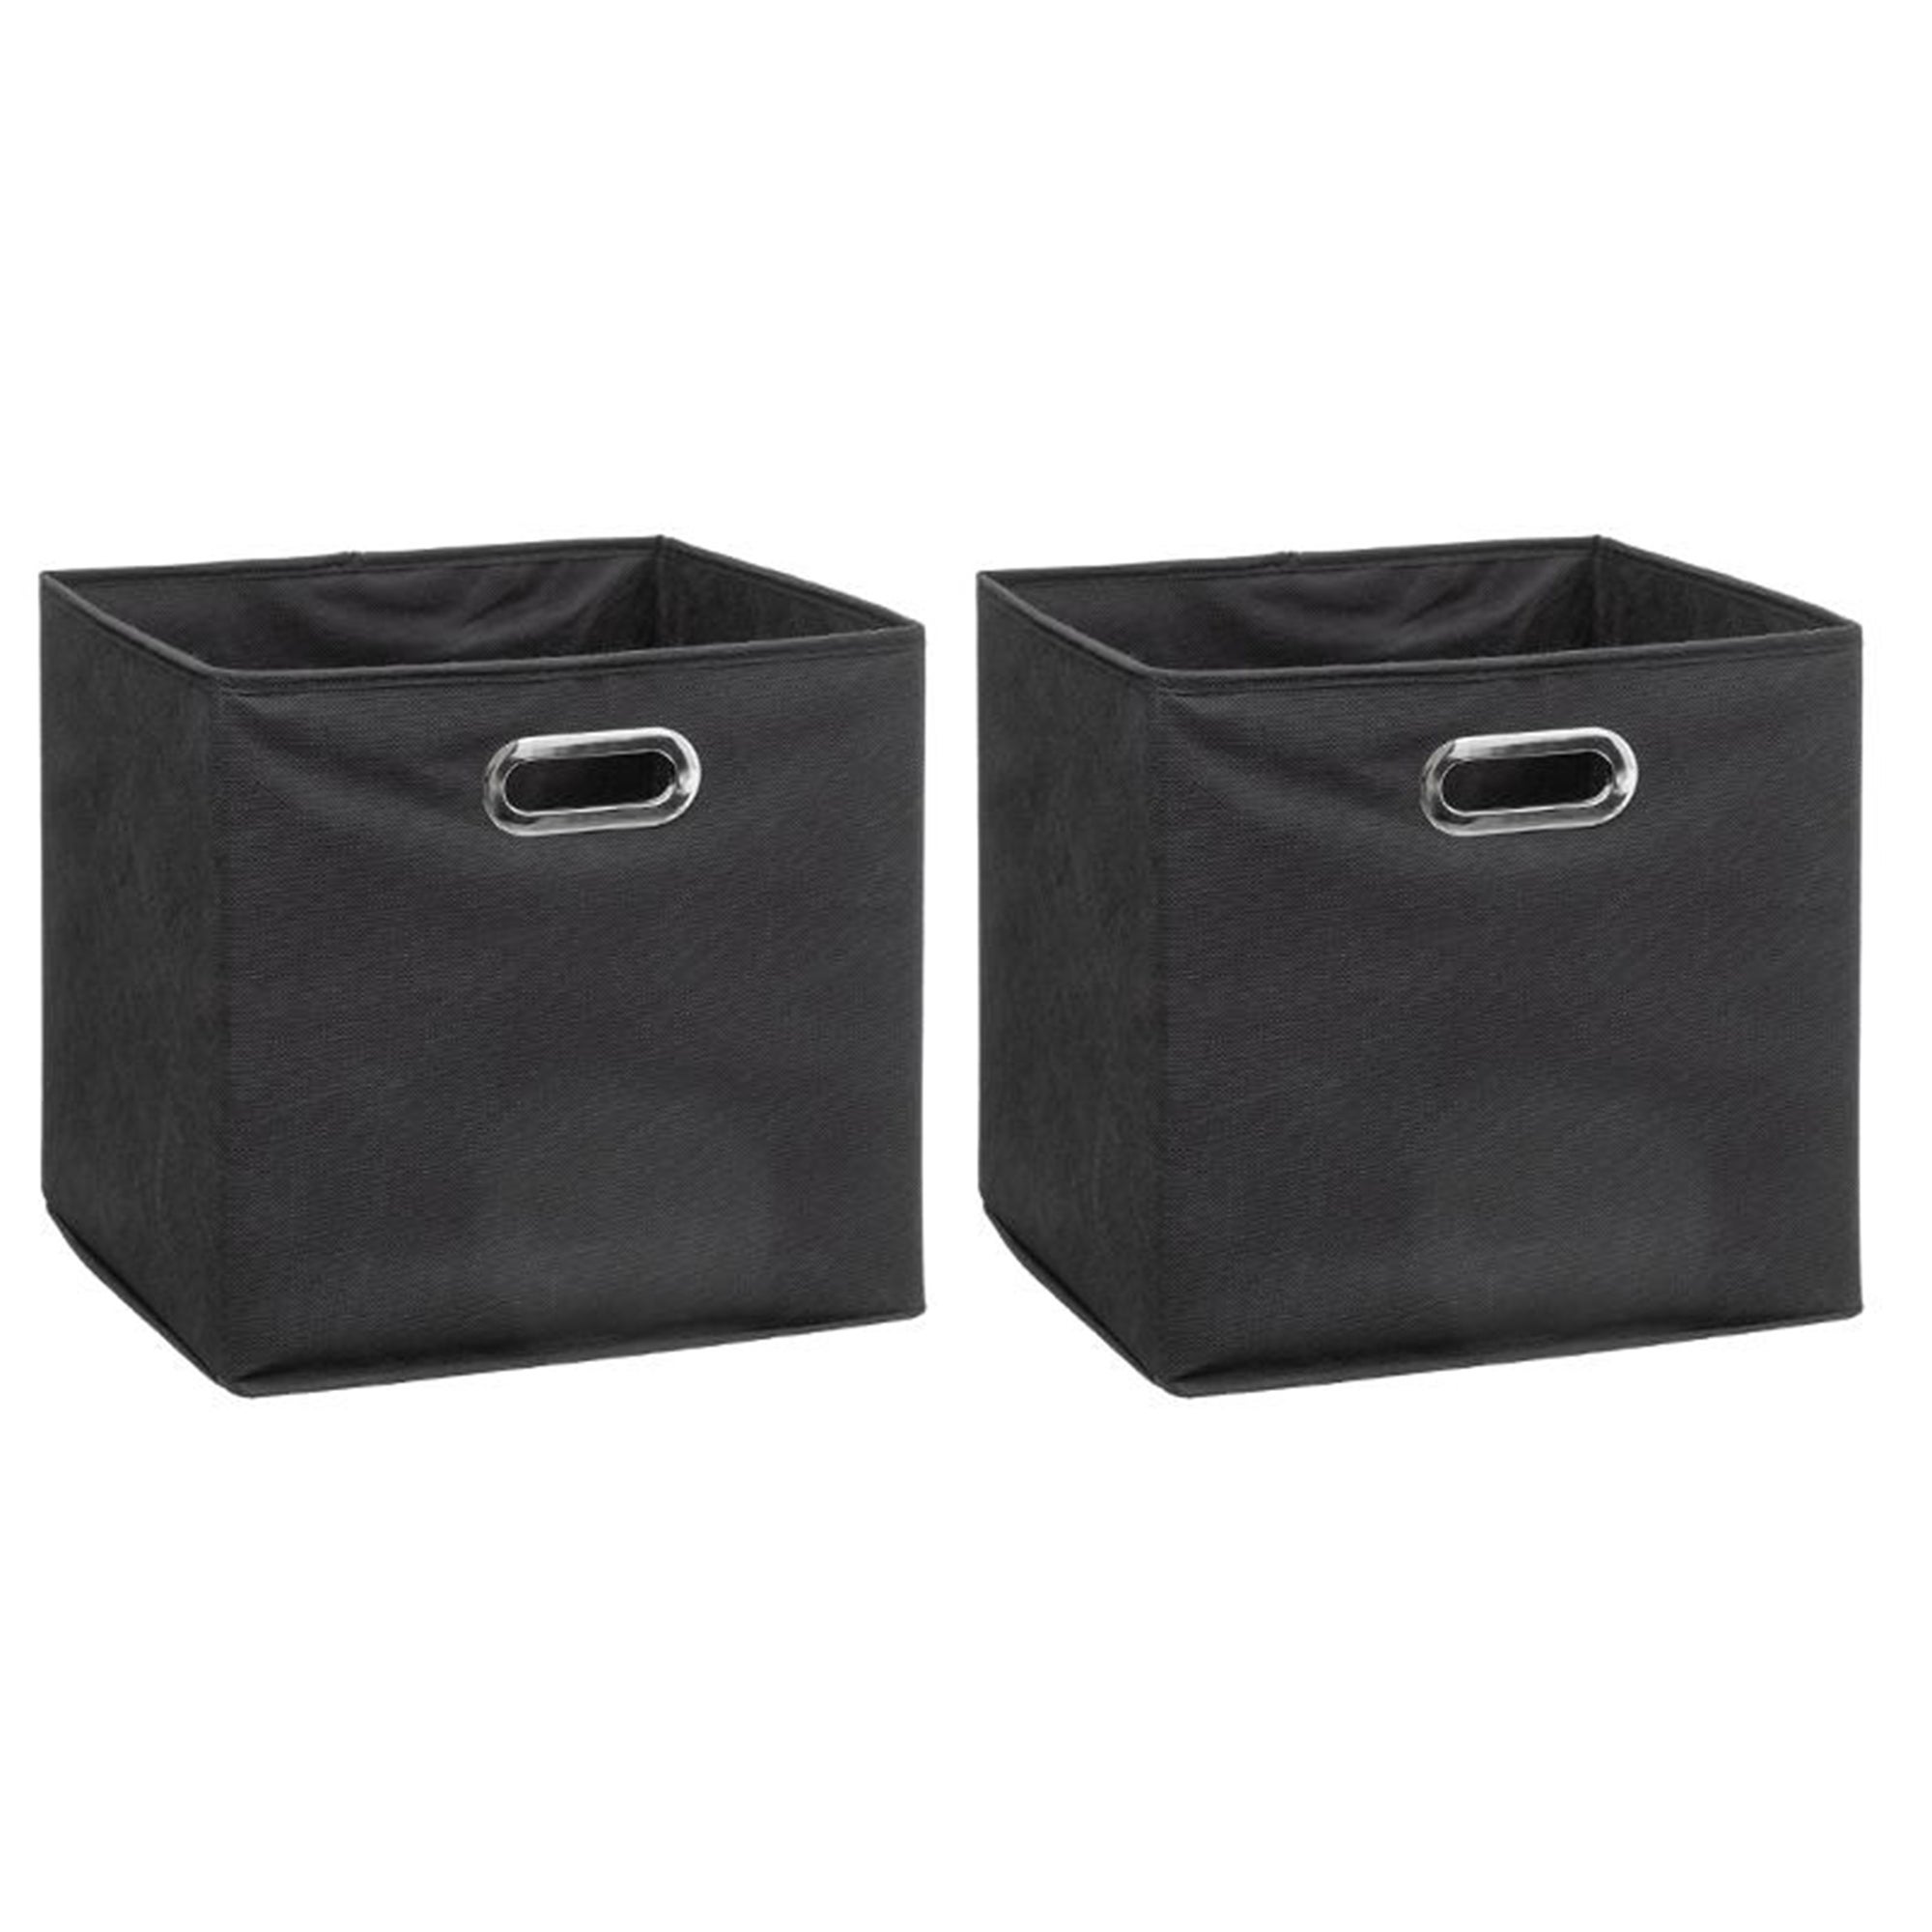 Mix and Modul Set of 2 Linen Effect Cube Storage Boxes